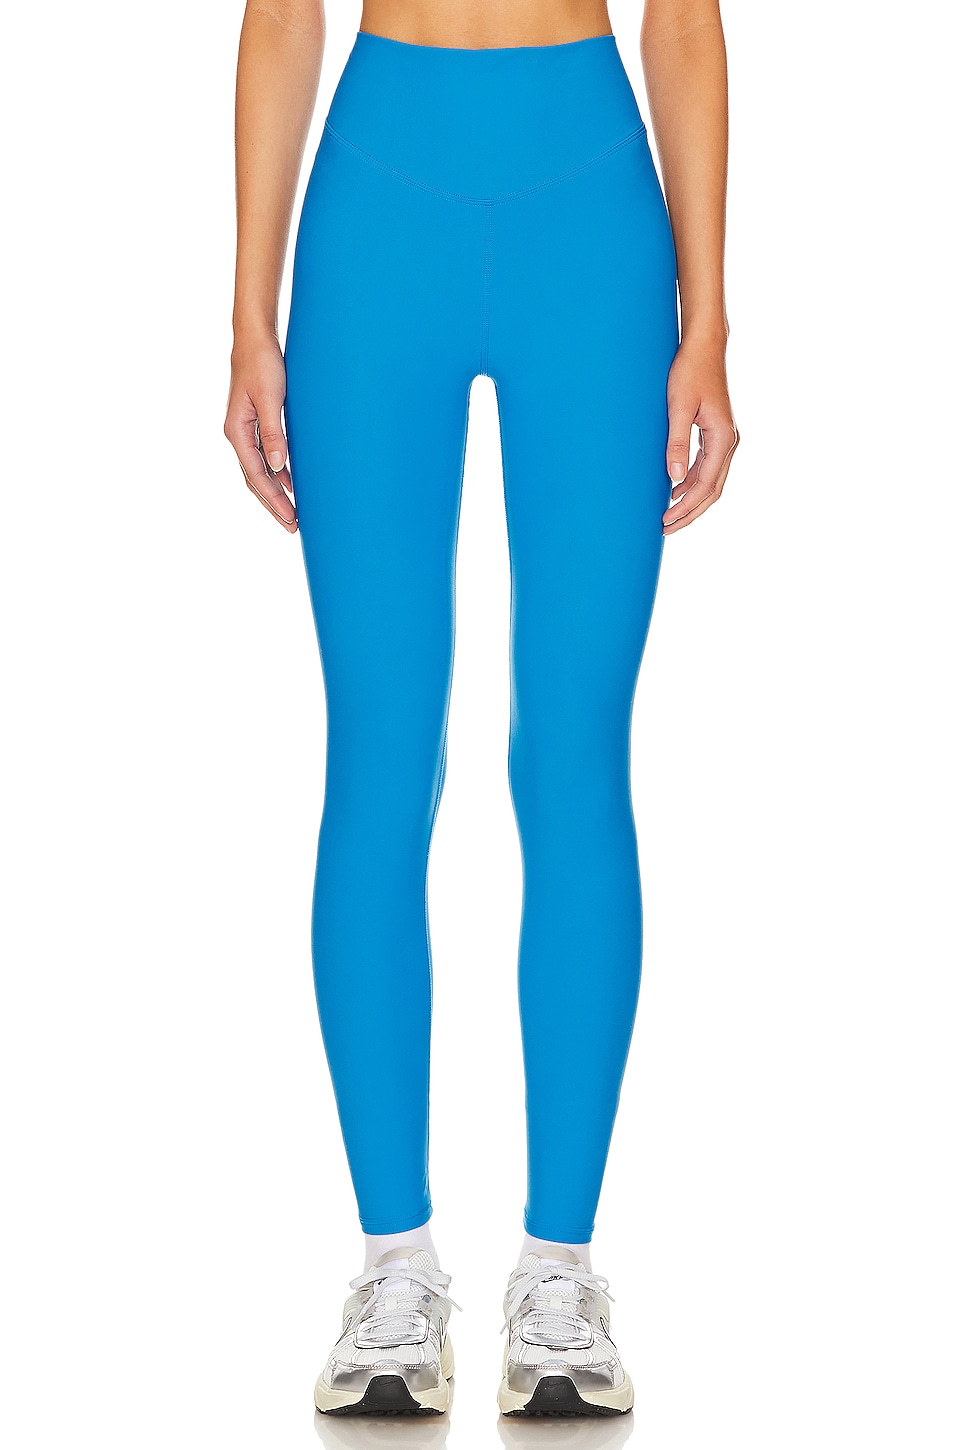 FORM SEAMLESS 25IN MIDI PANT in POOL